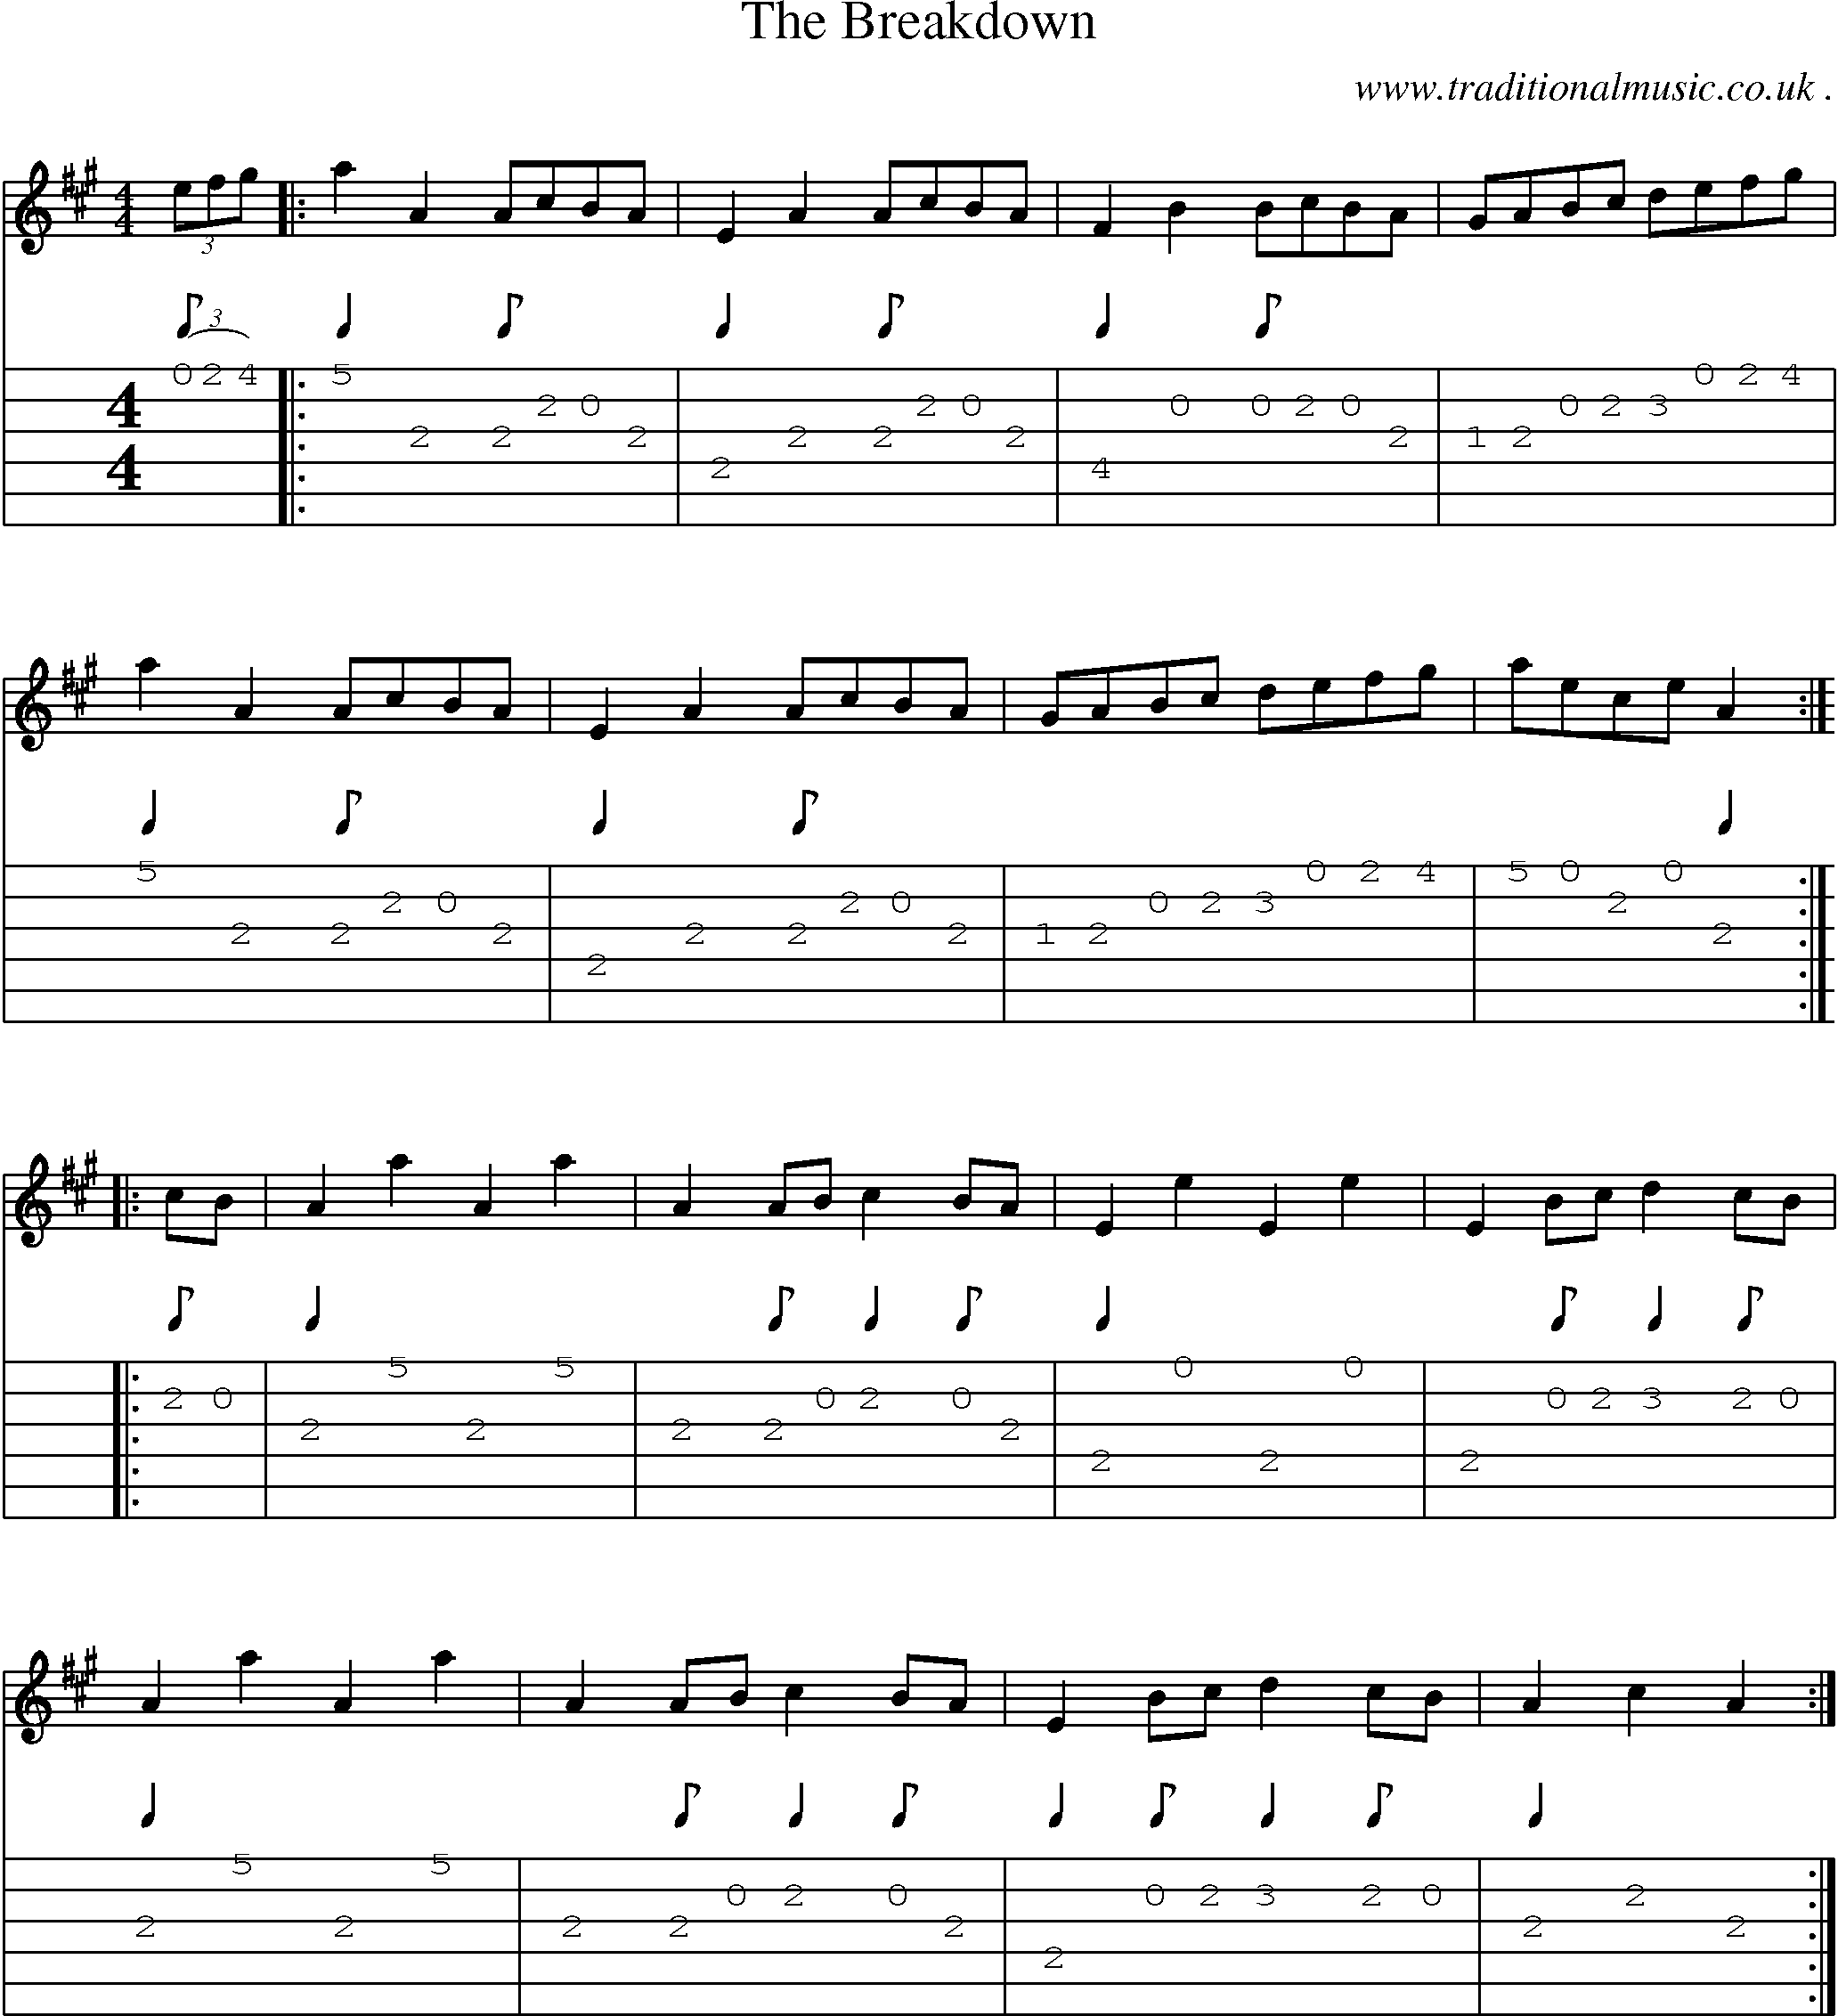 Sheet-Music and Guitar Tabs for The Breakdown